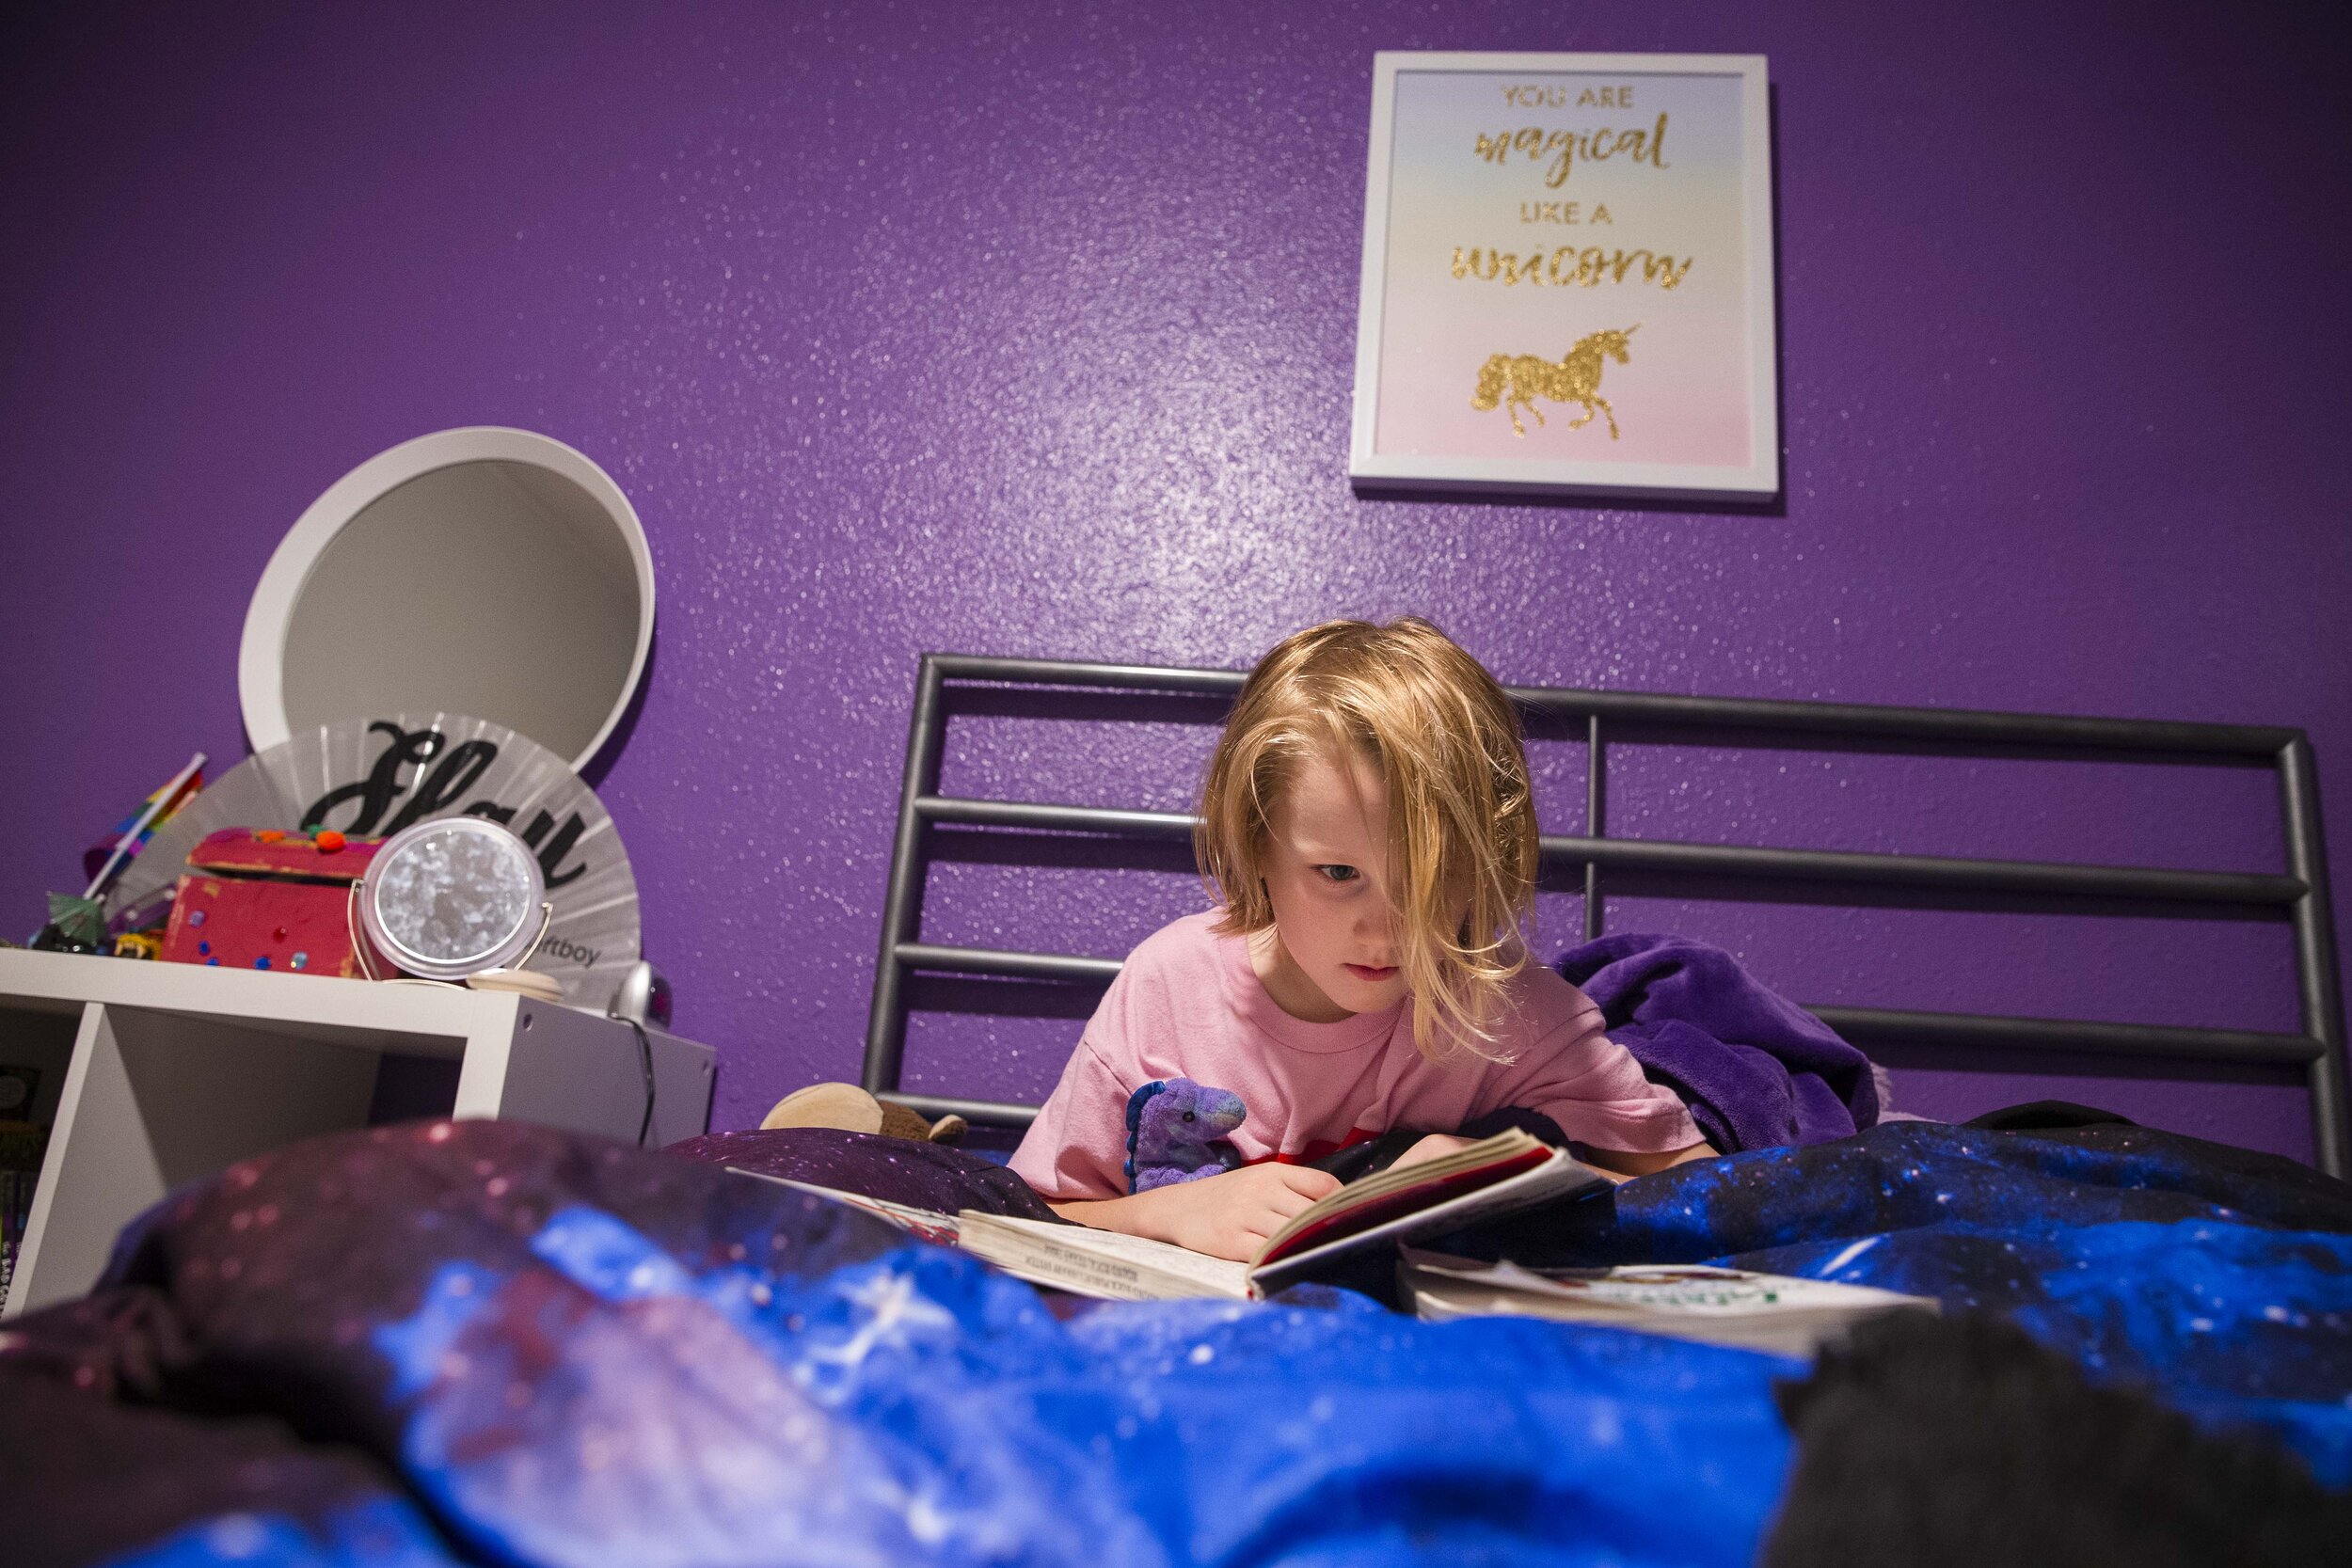  Keegan, a gender creative child, then 8, reads before going to sleep in his room painted in his favorite color purple at his home in Austin, Texas, U.S., August 22, 2018.  